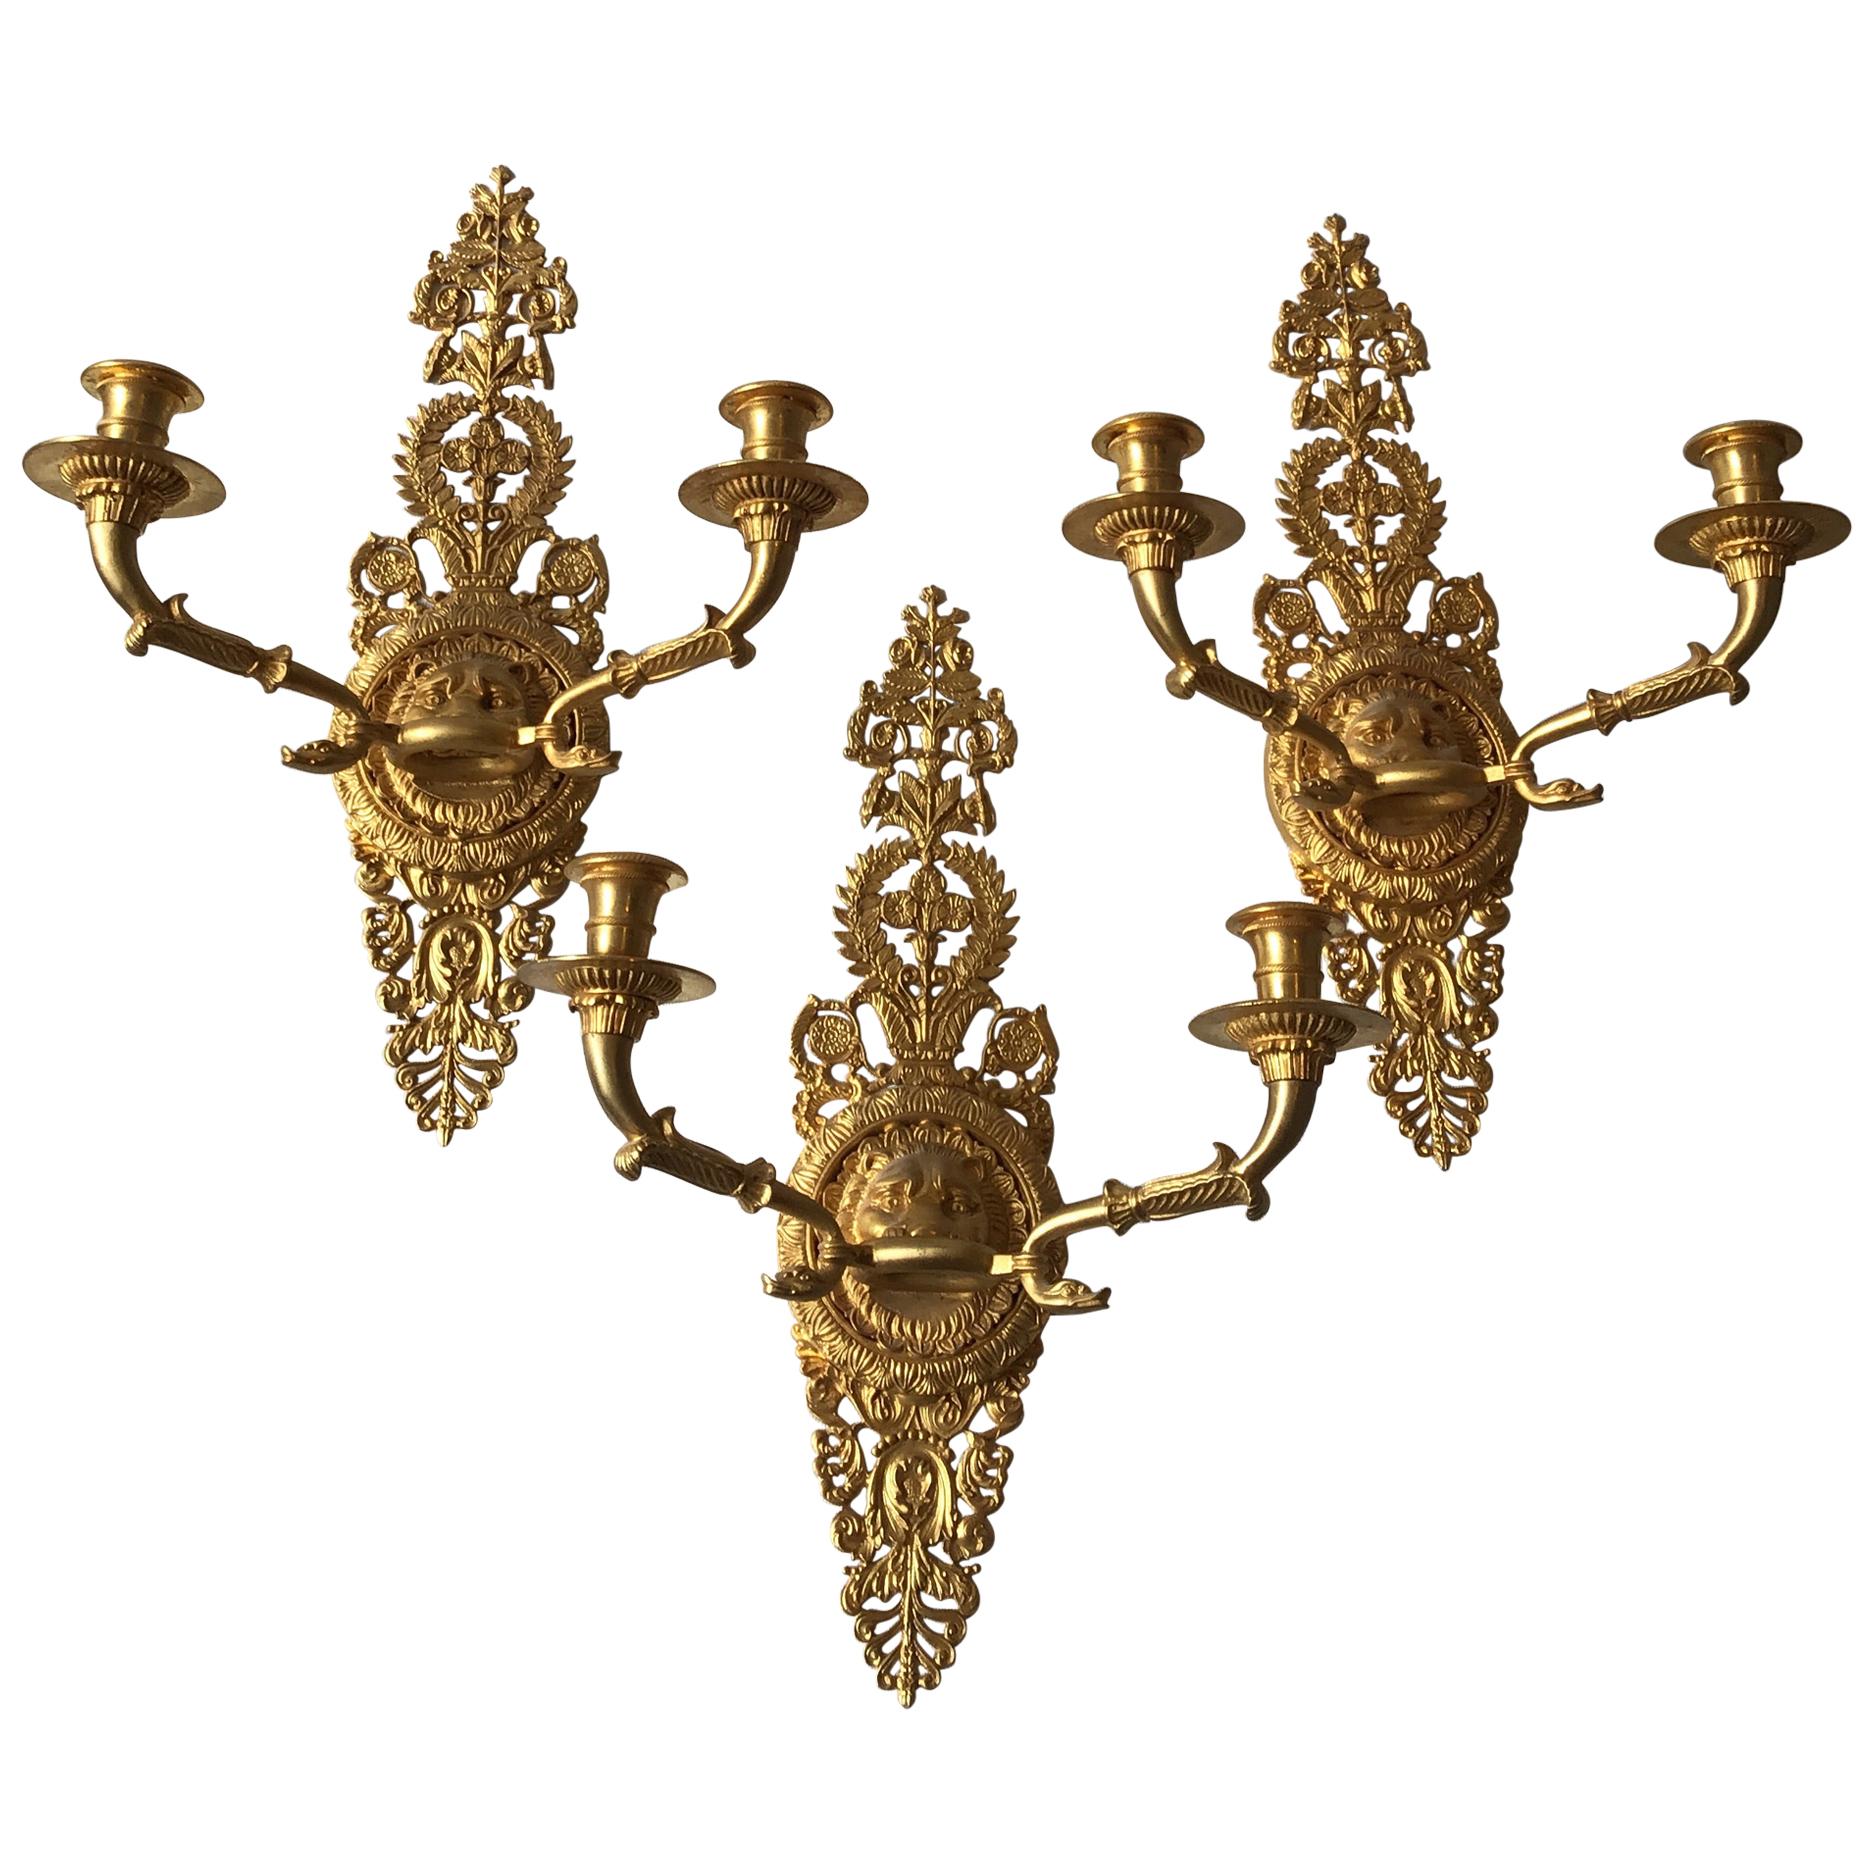 3 Versace Style Gold-Plated Lion Head Classical Sconces For Sale